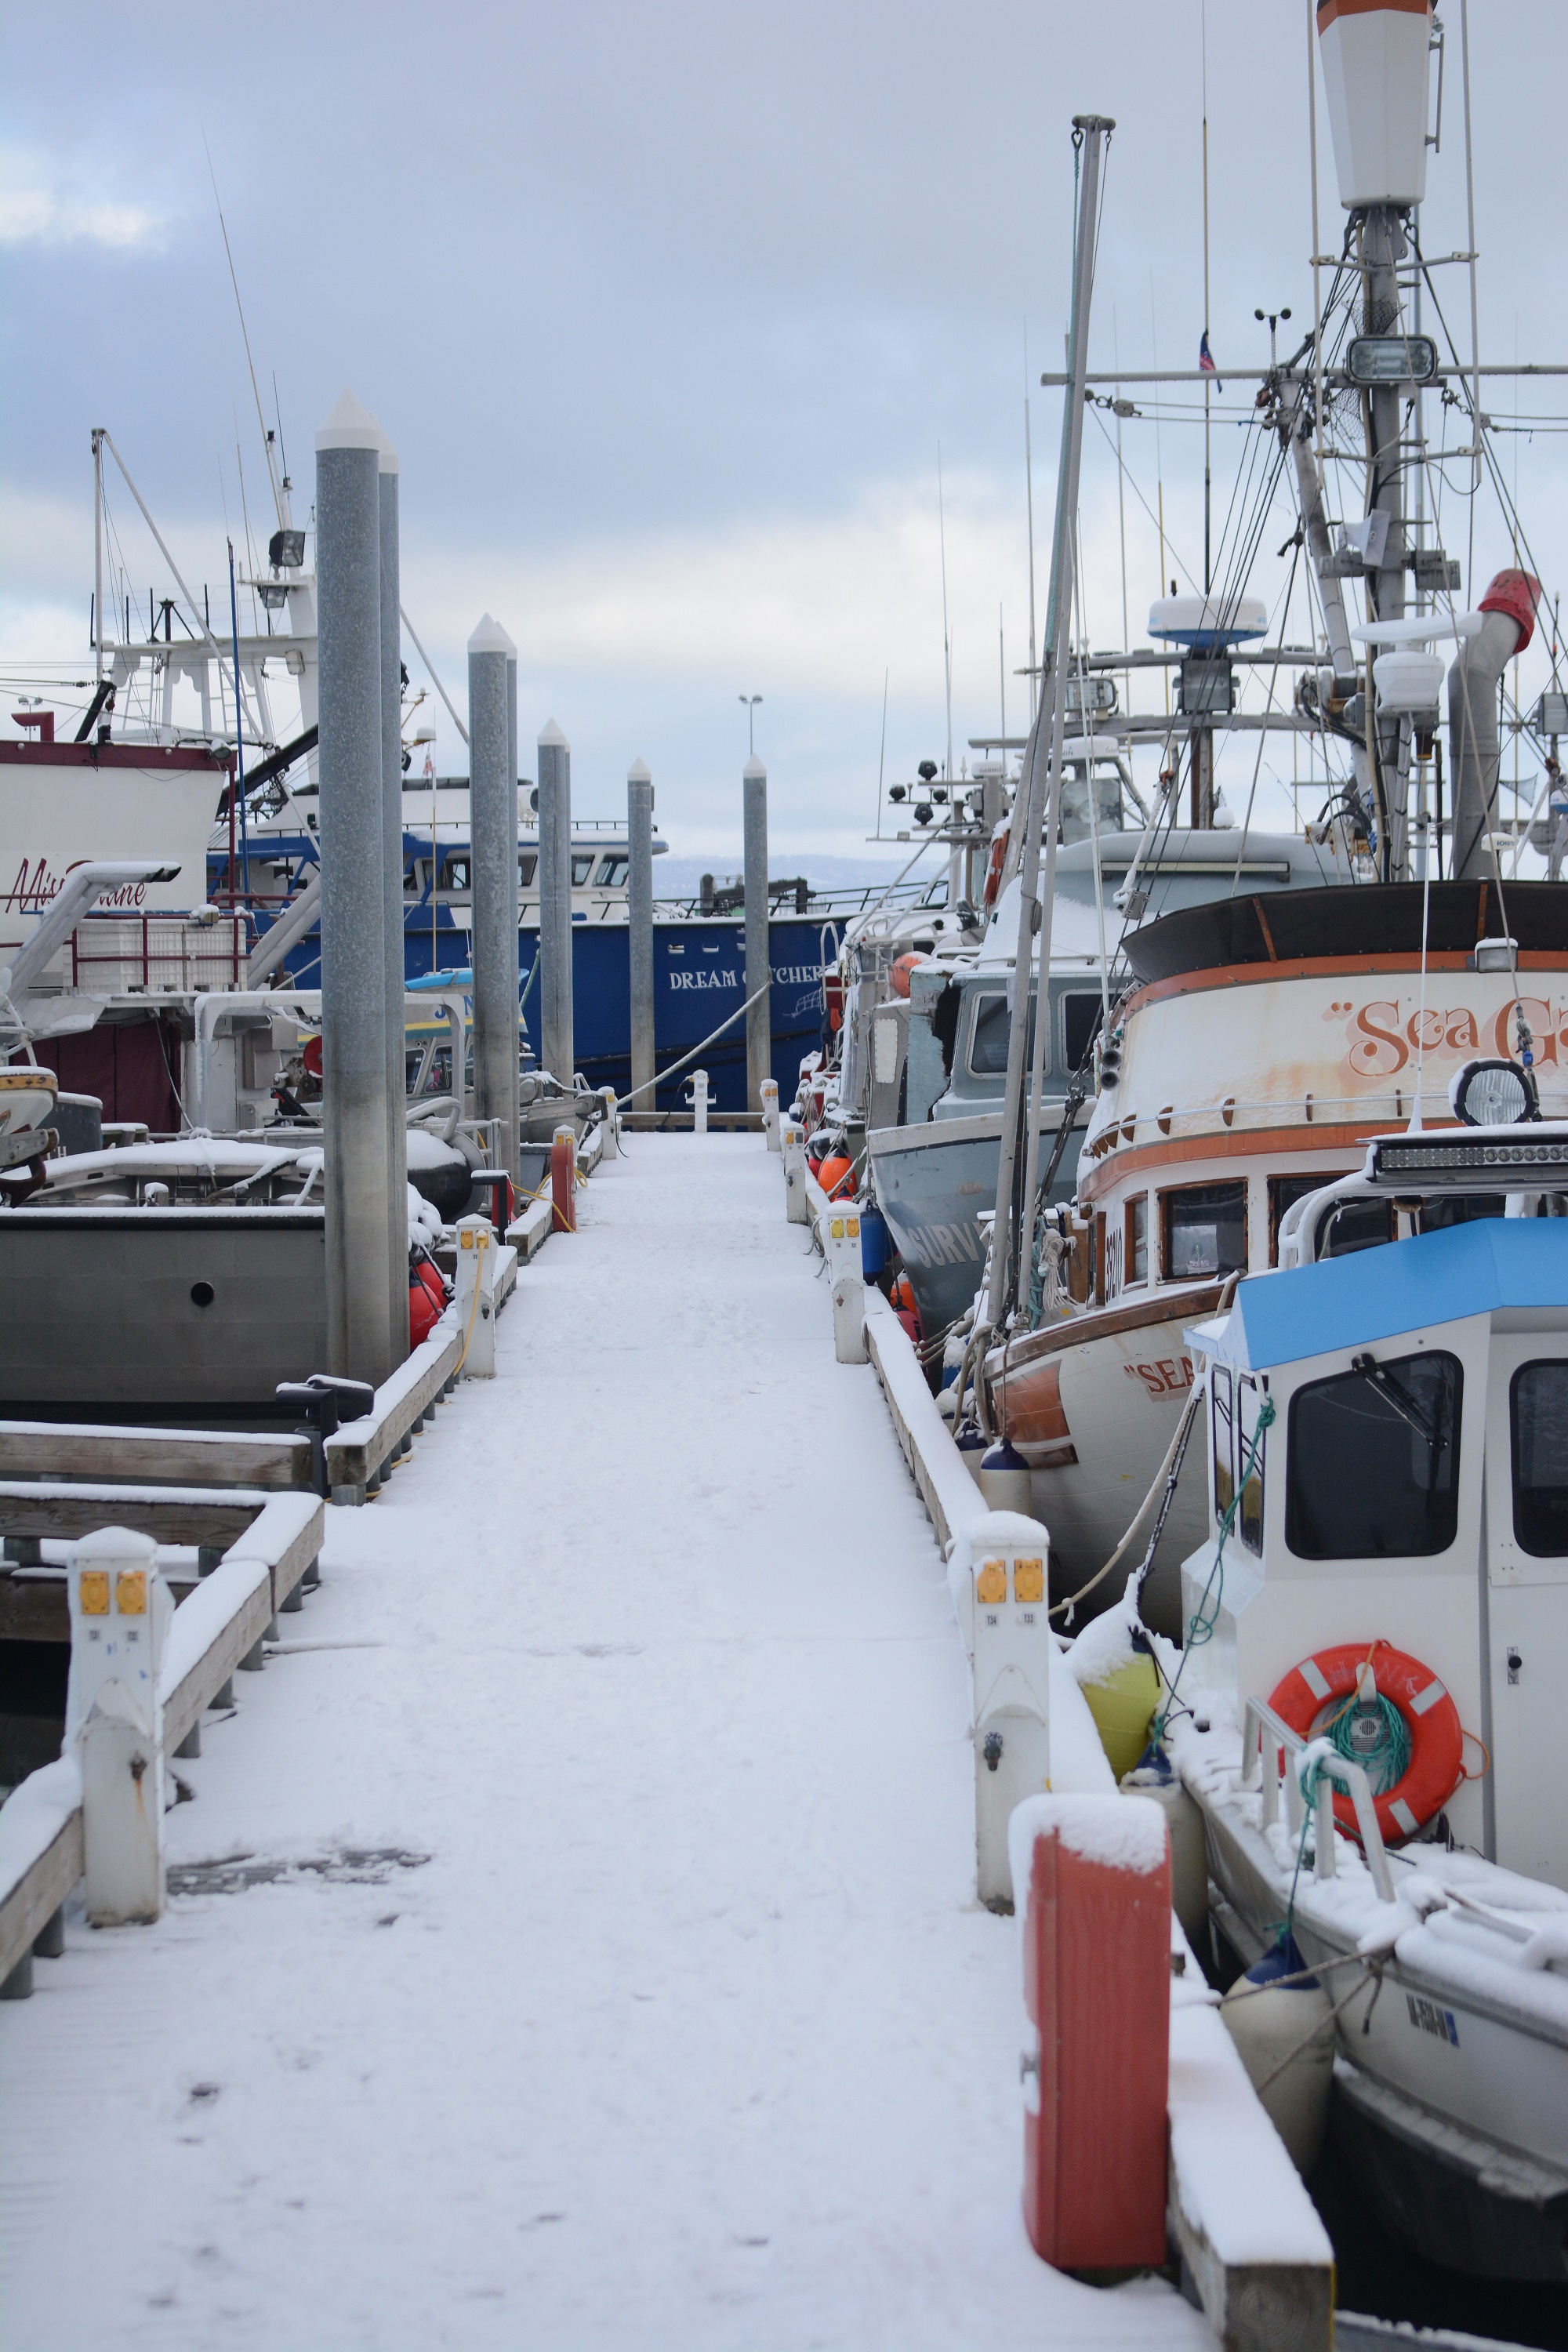 Fresh snow covers boats and ramps at the Homer Harbor on Monday. The first snowfall of the season hit Homer on Oct. 17, causing numerous accidents on the lower Kenai Peninsula.-Photo by Michael Armstrong, Homer News